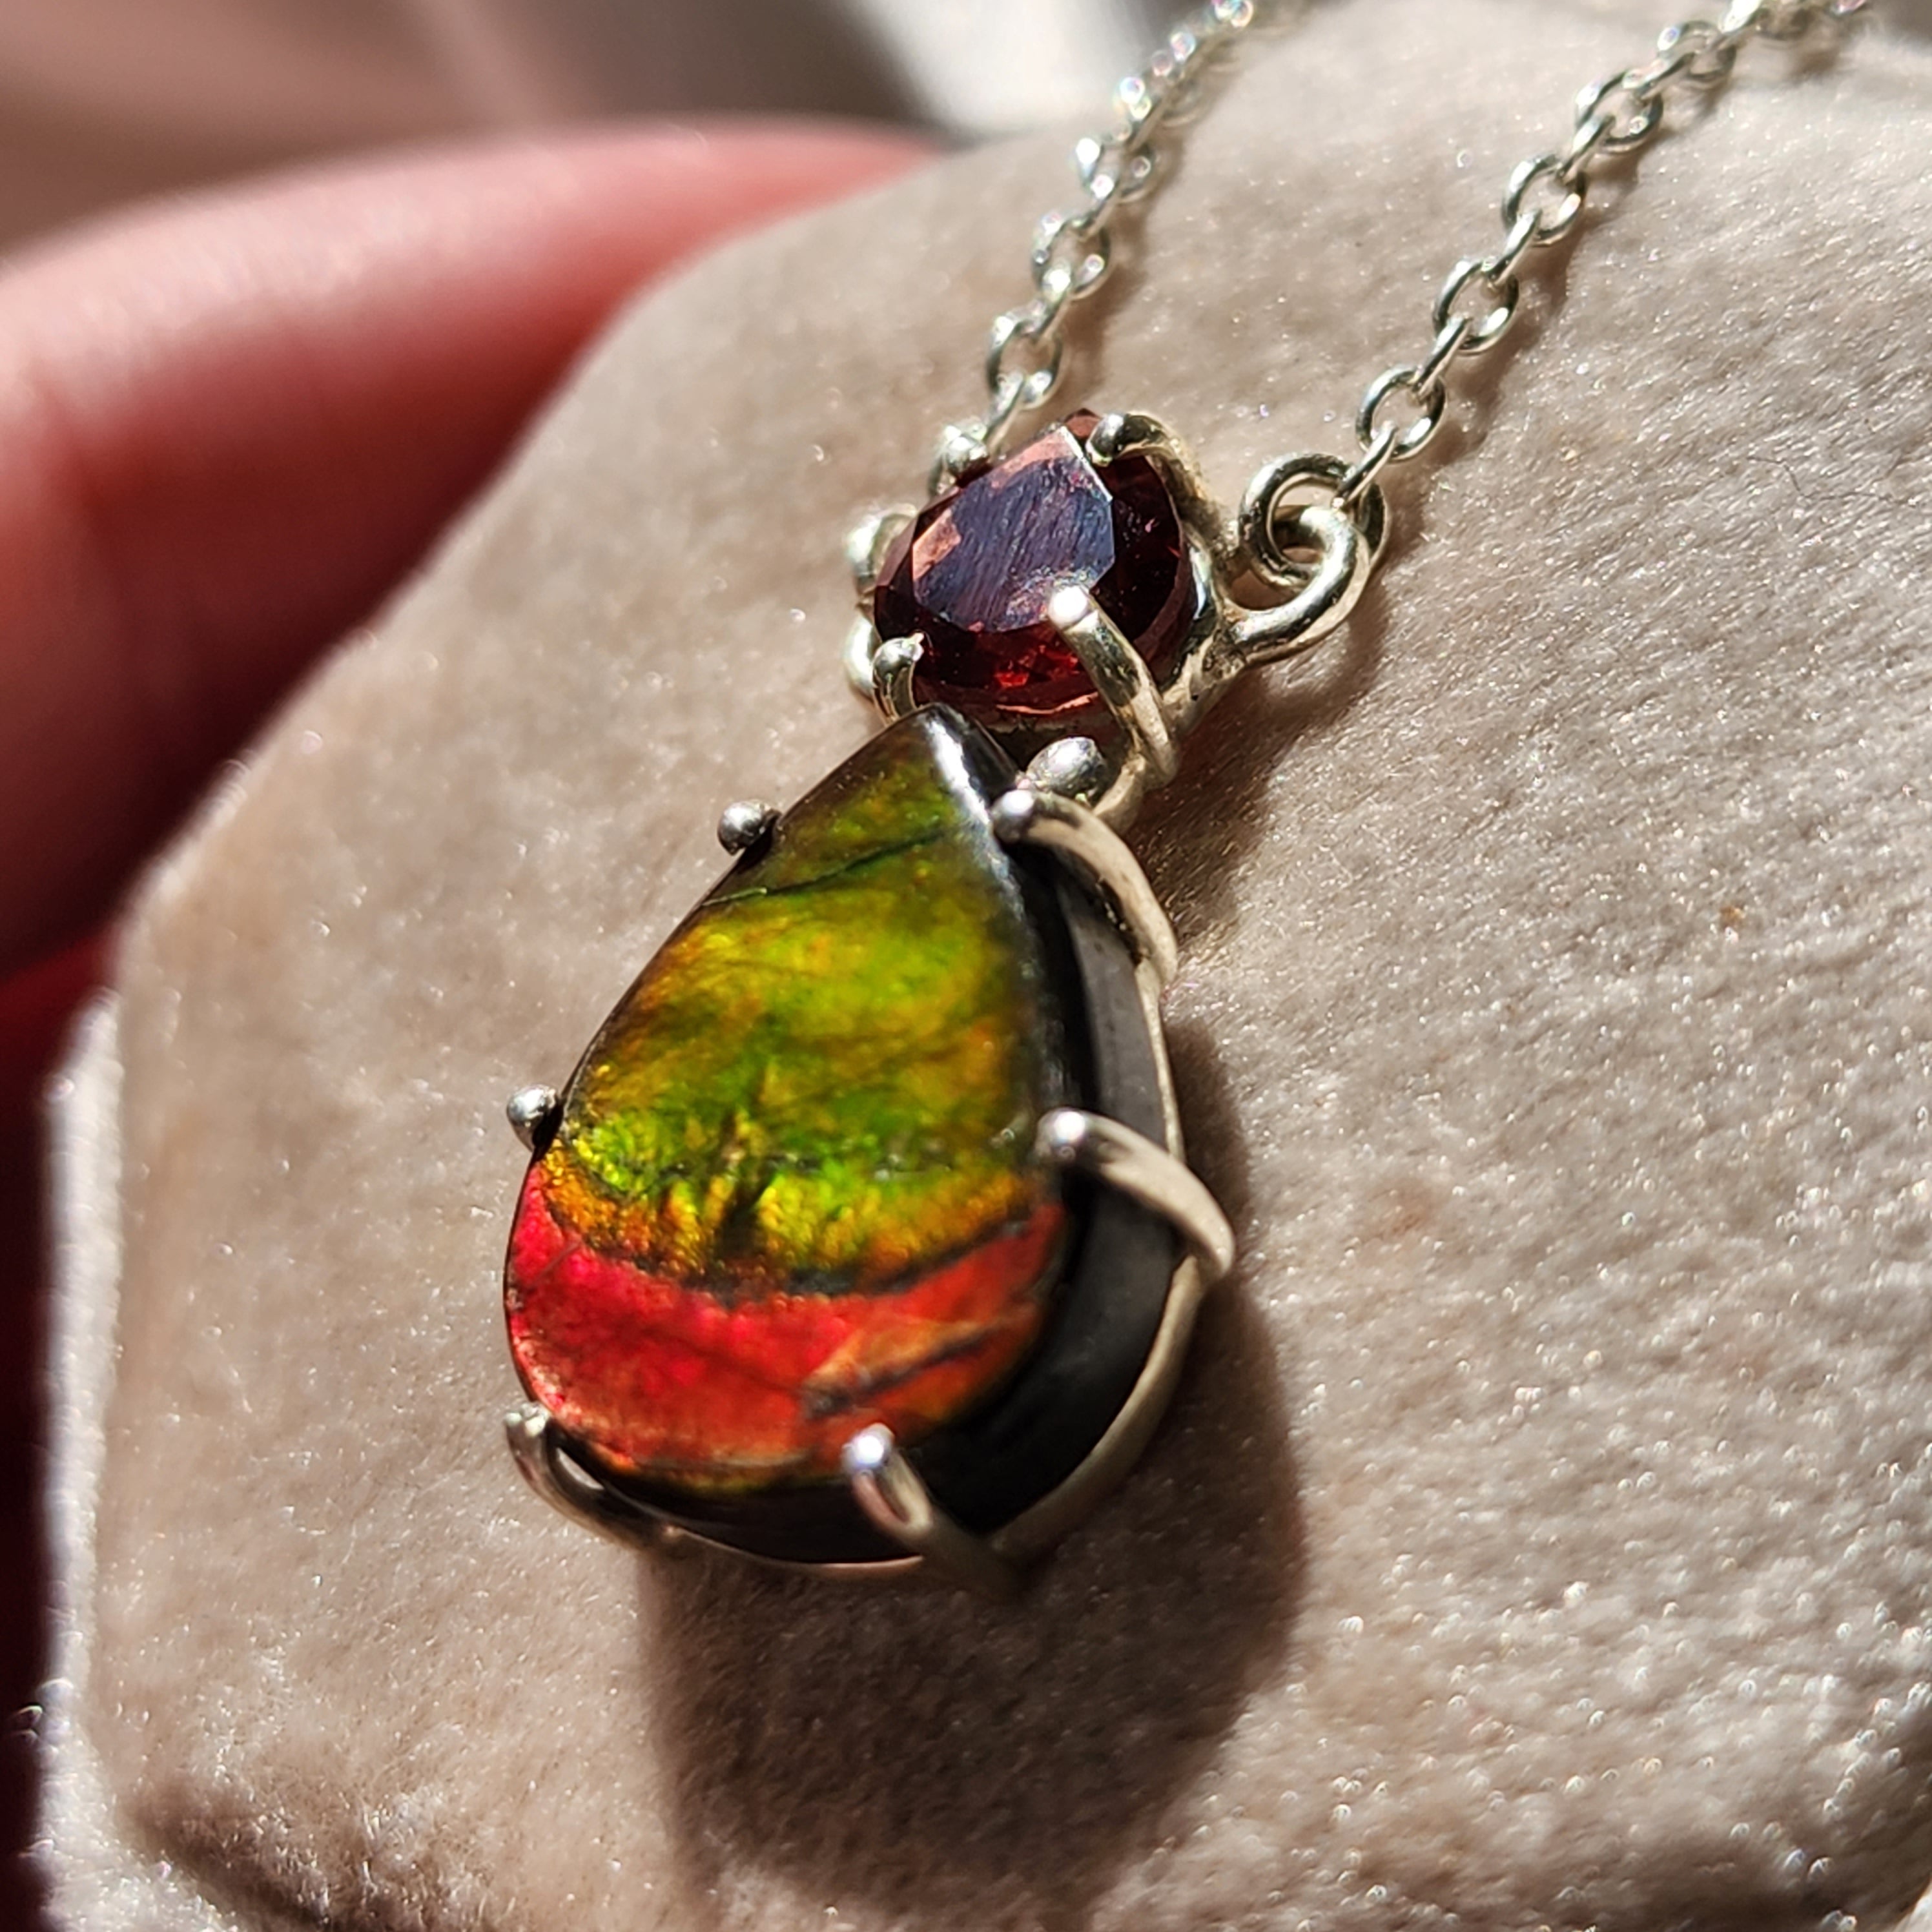 Ammolite x Garnet Necklace .925 Silver for Good Luck, Prosperity and Protection